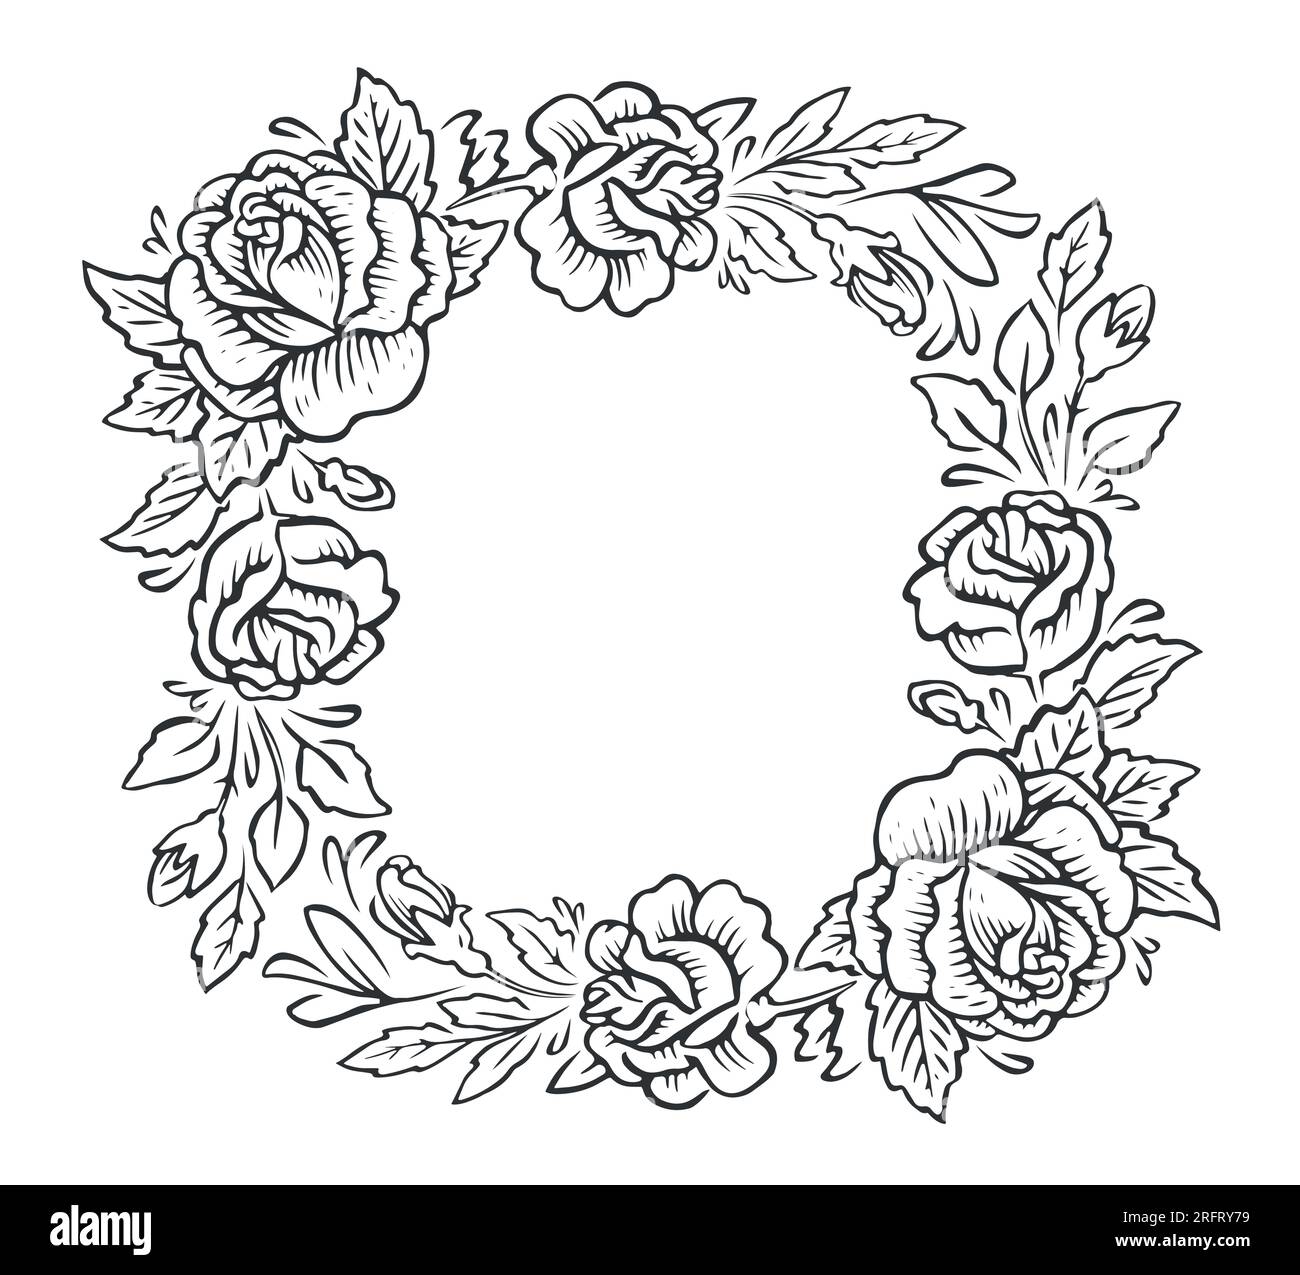 Frame with decorative flowers with leaves. Floral wreath in vintage engraving style. Sketch vector illustration Stock Vector